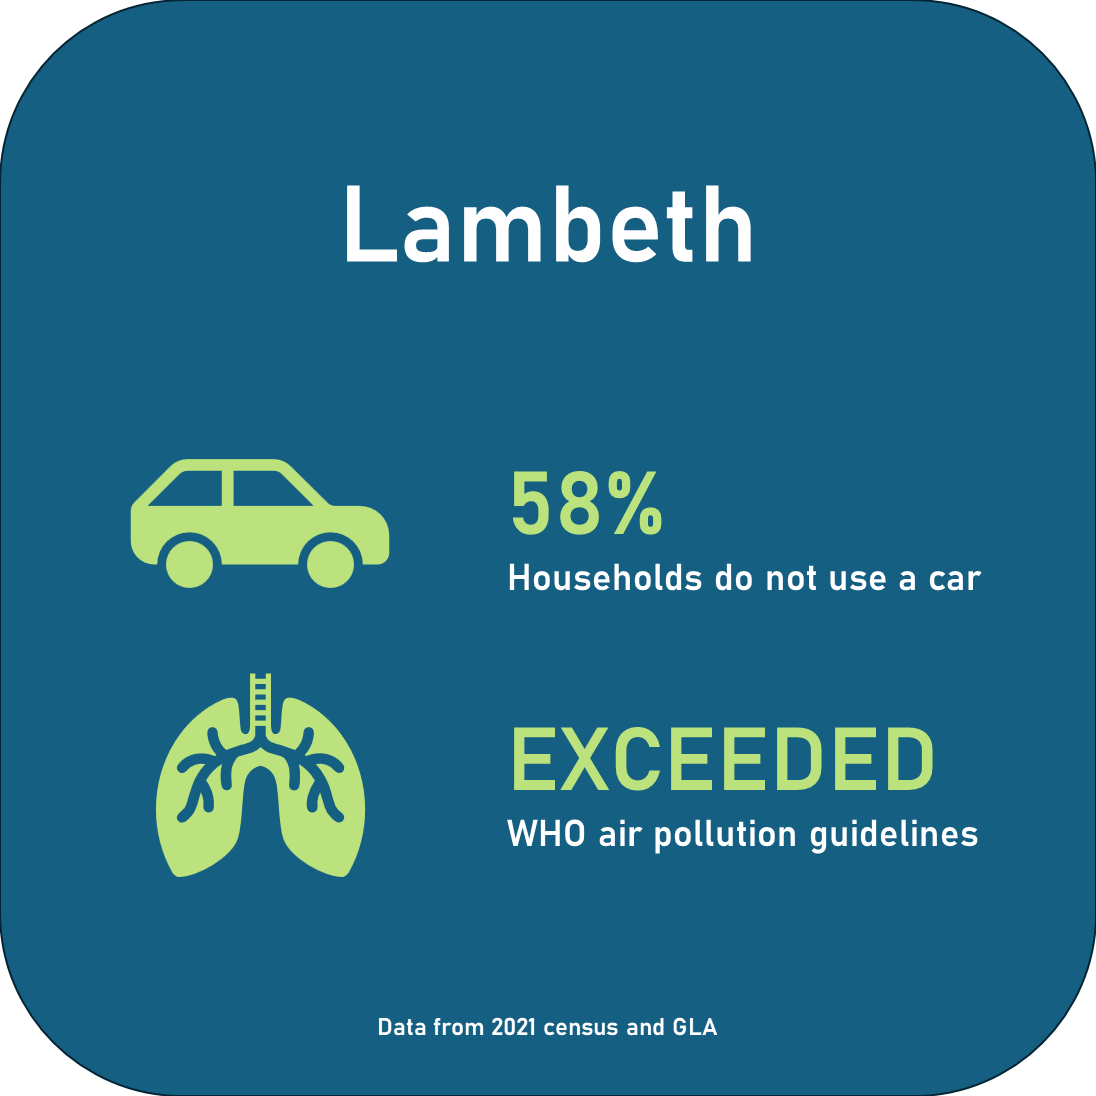 58% households do not use a car. Exceeded WHO air pollution guidelines.